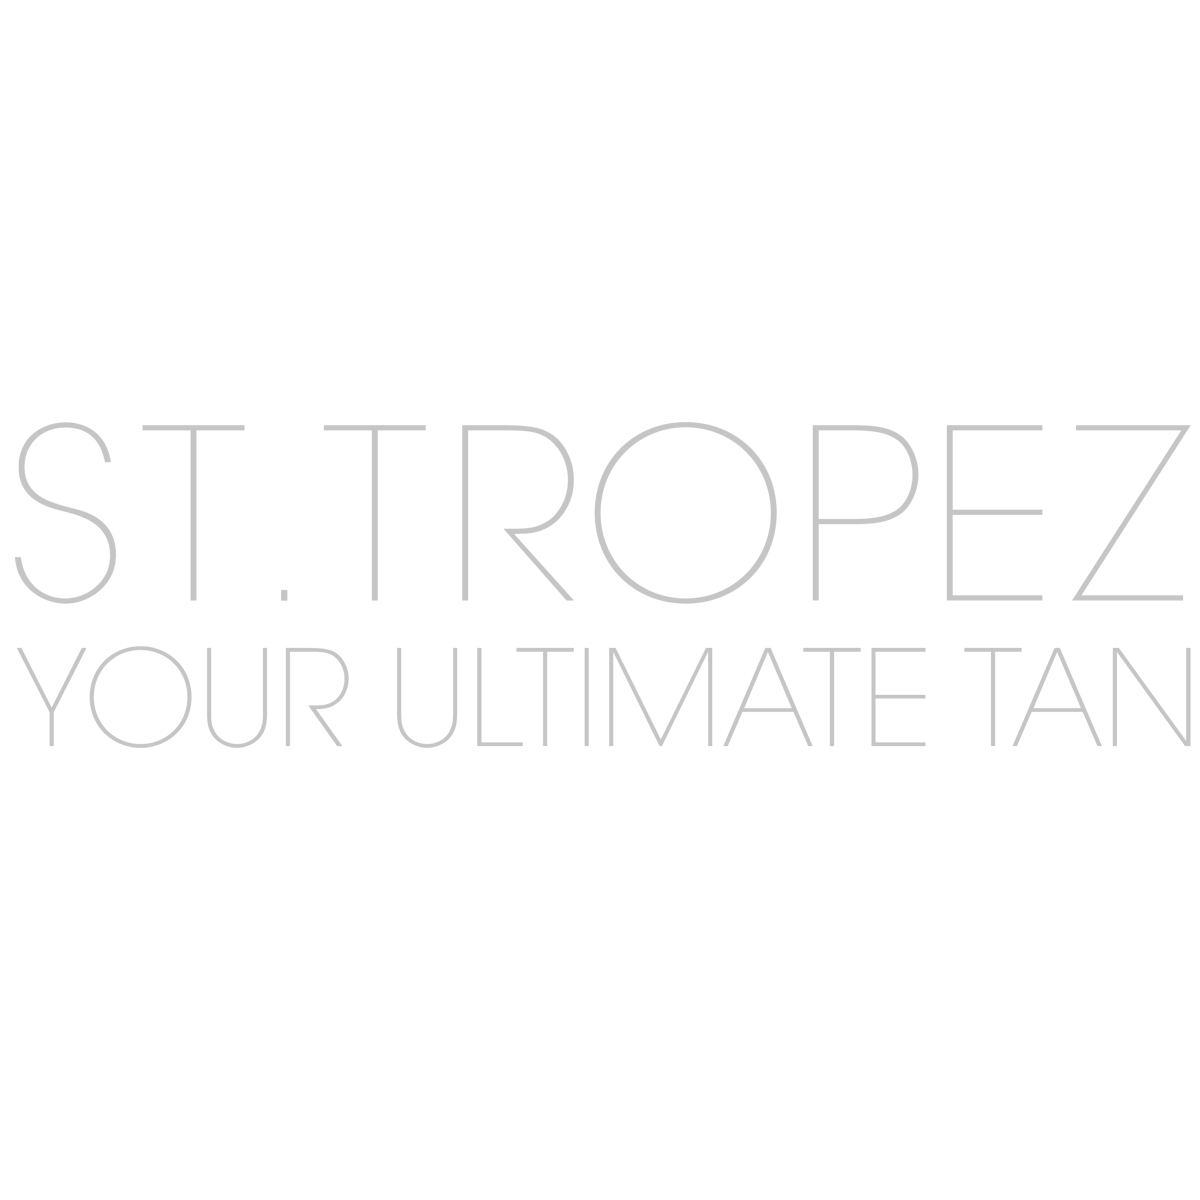 St. Tropez your ultimate Tan